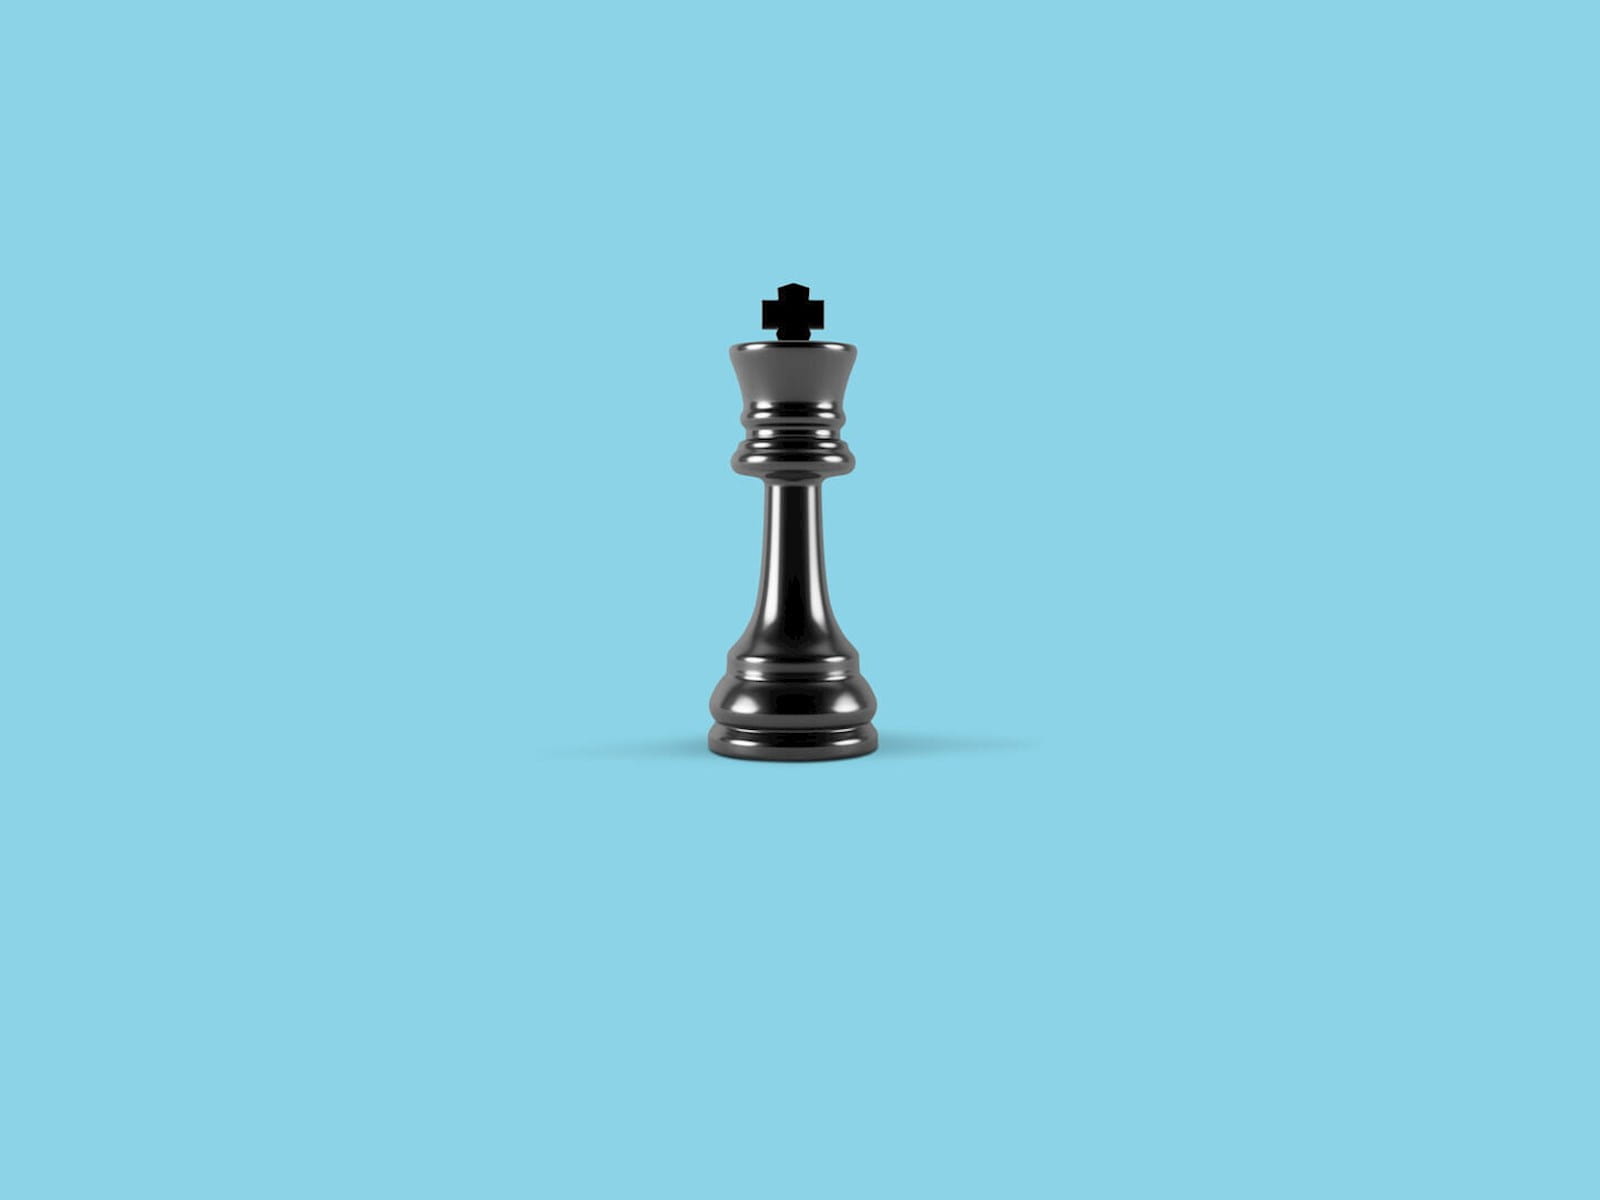 Chess piece on a blue background